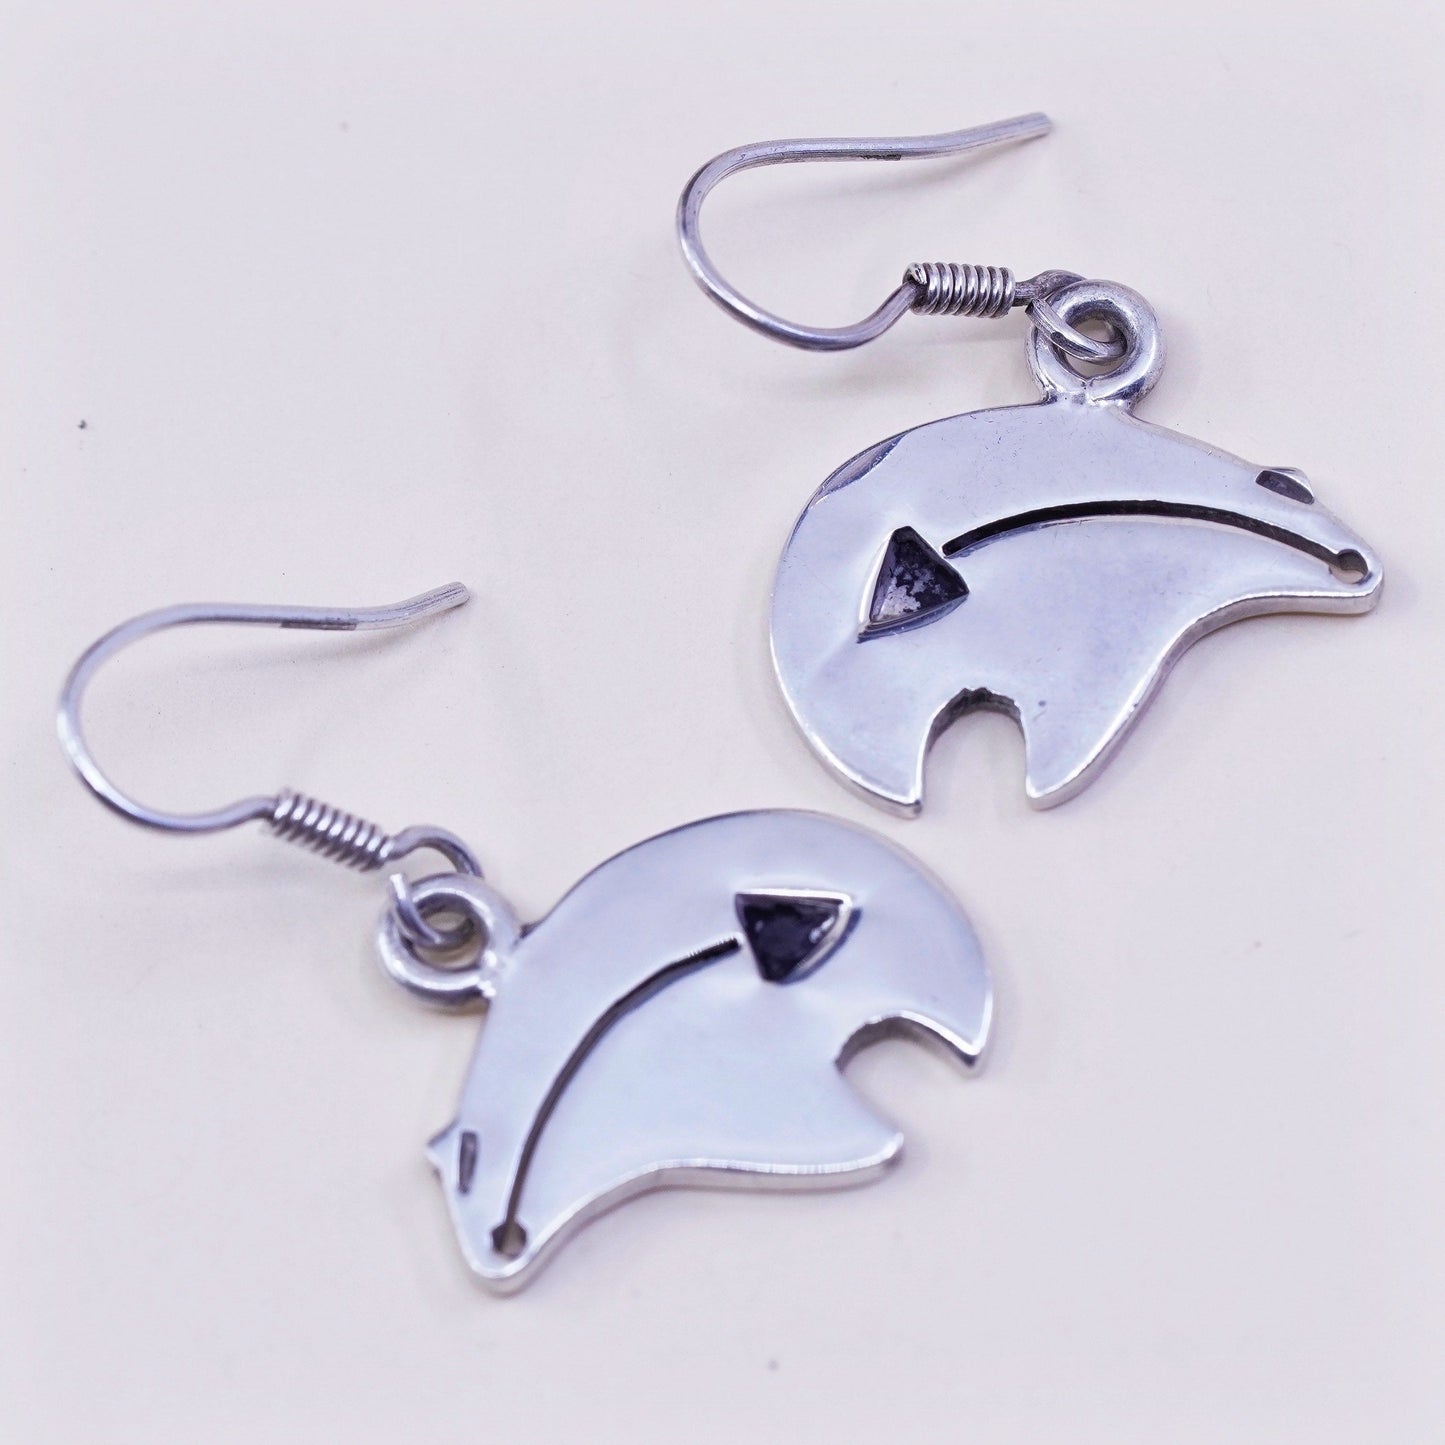 Vintage Mexico Sterling silver handmade earrings, 925 arrow bear dangles, Stamped mexico 925